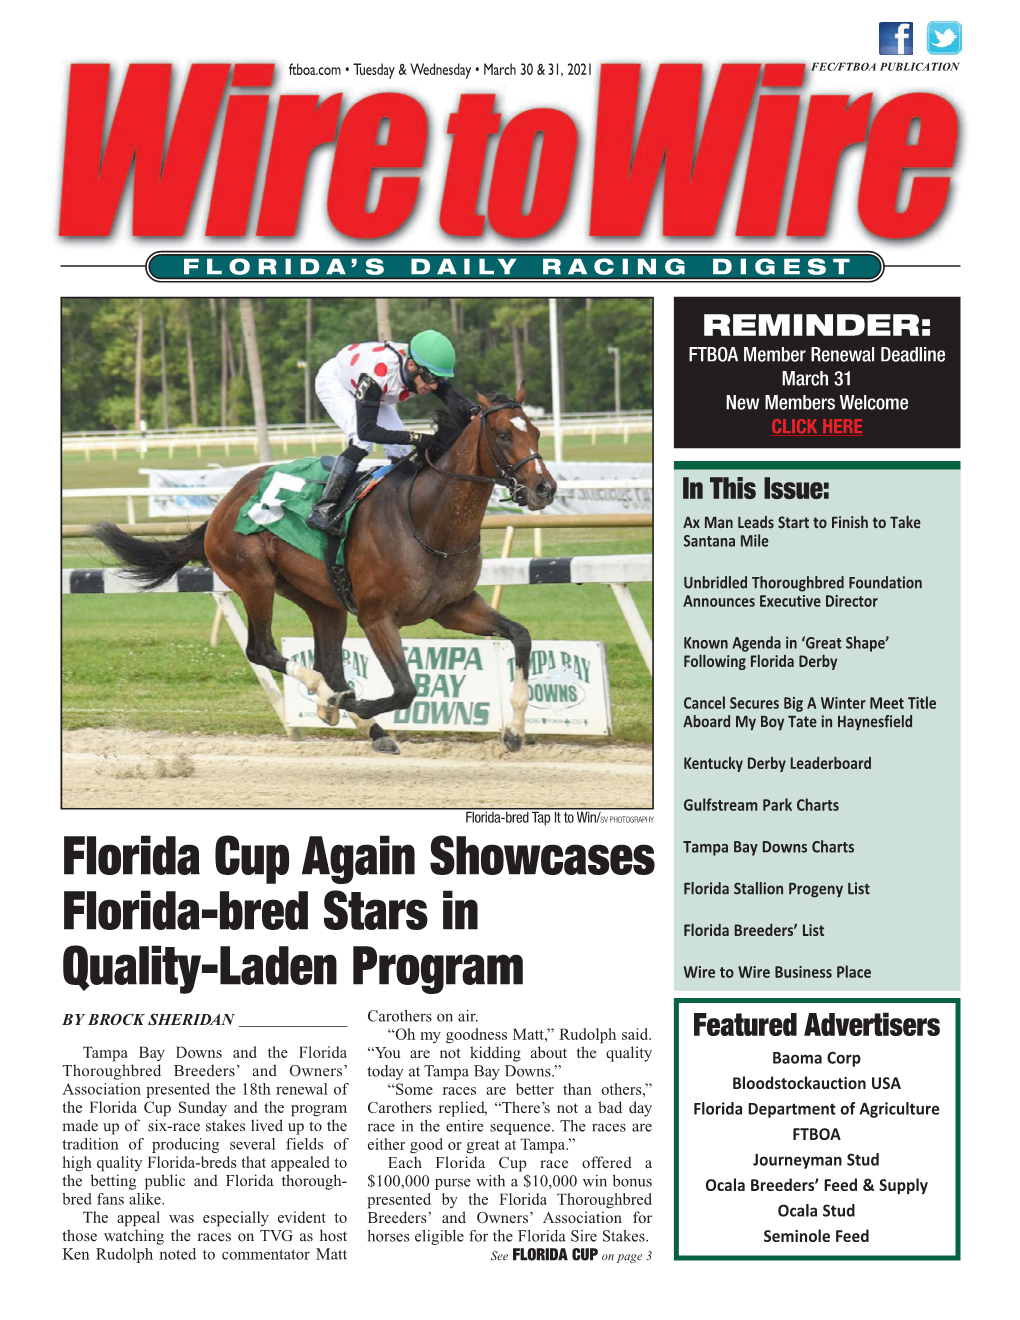 Florida Cup Again Showcases Florida-Bred Stars in Quality-Laden